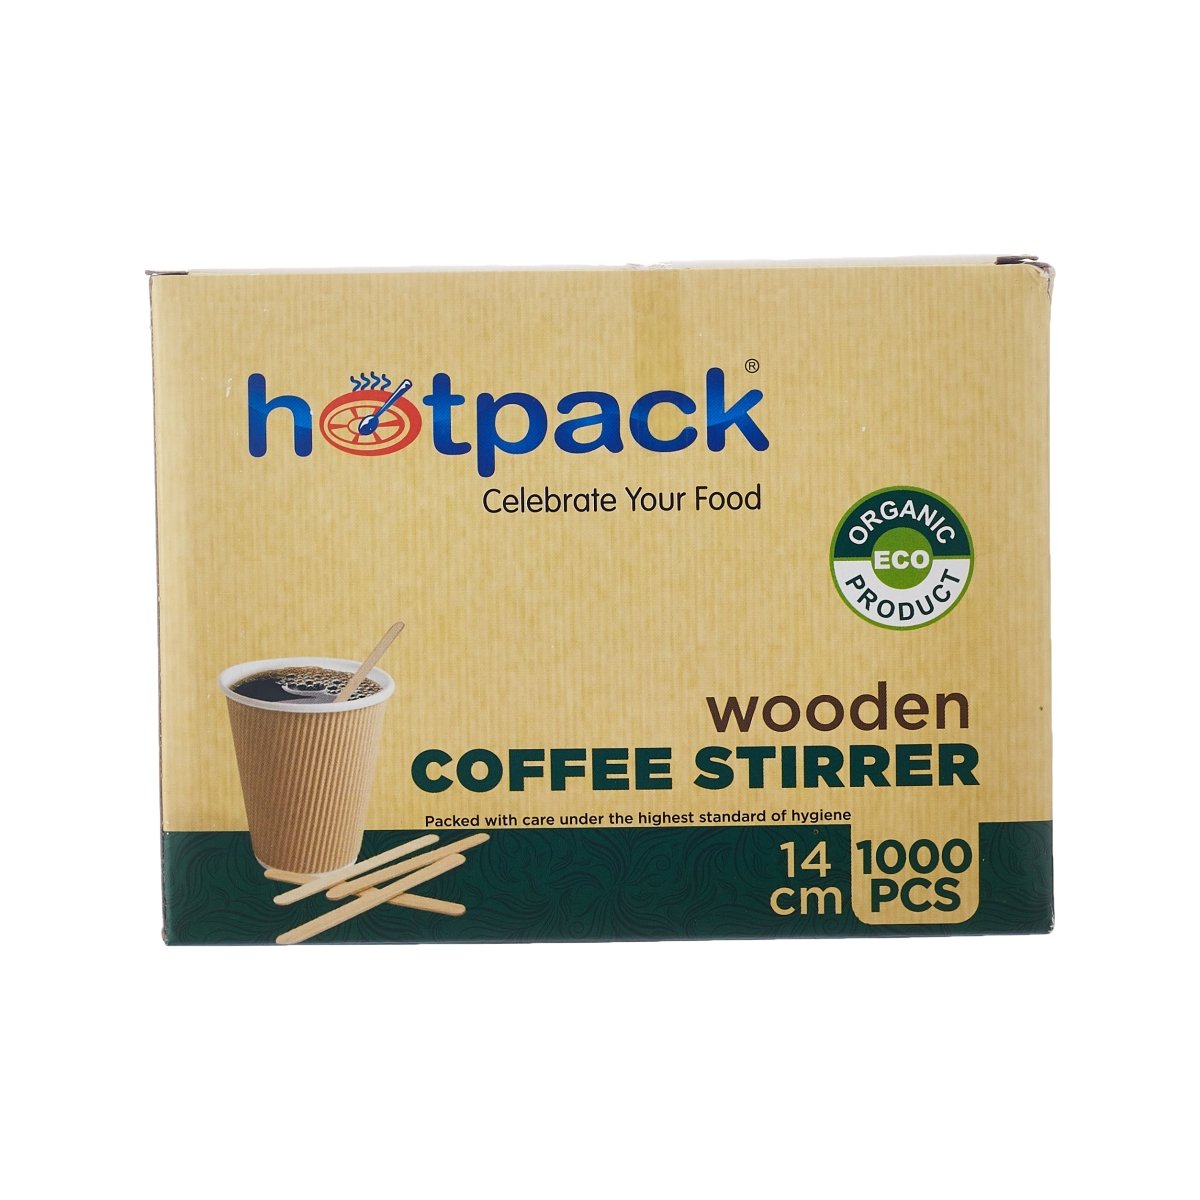 Disposable Wooden Coffee Stirrer - hotpackwebstore.com - Wooden Coffee Stirrer